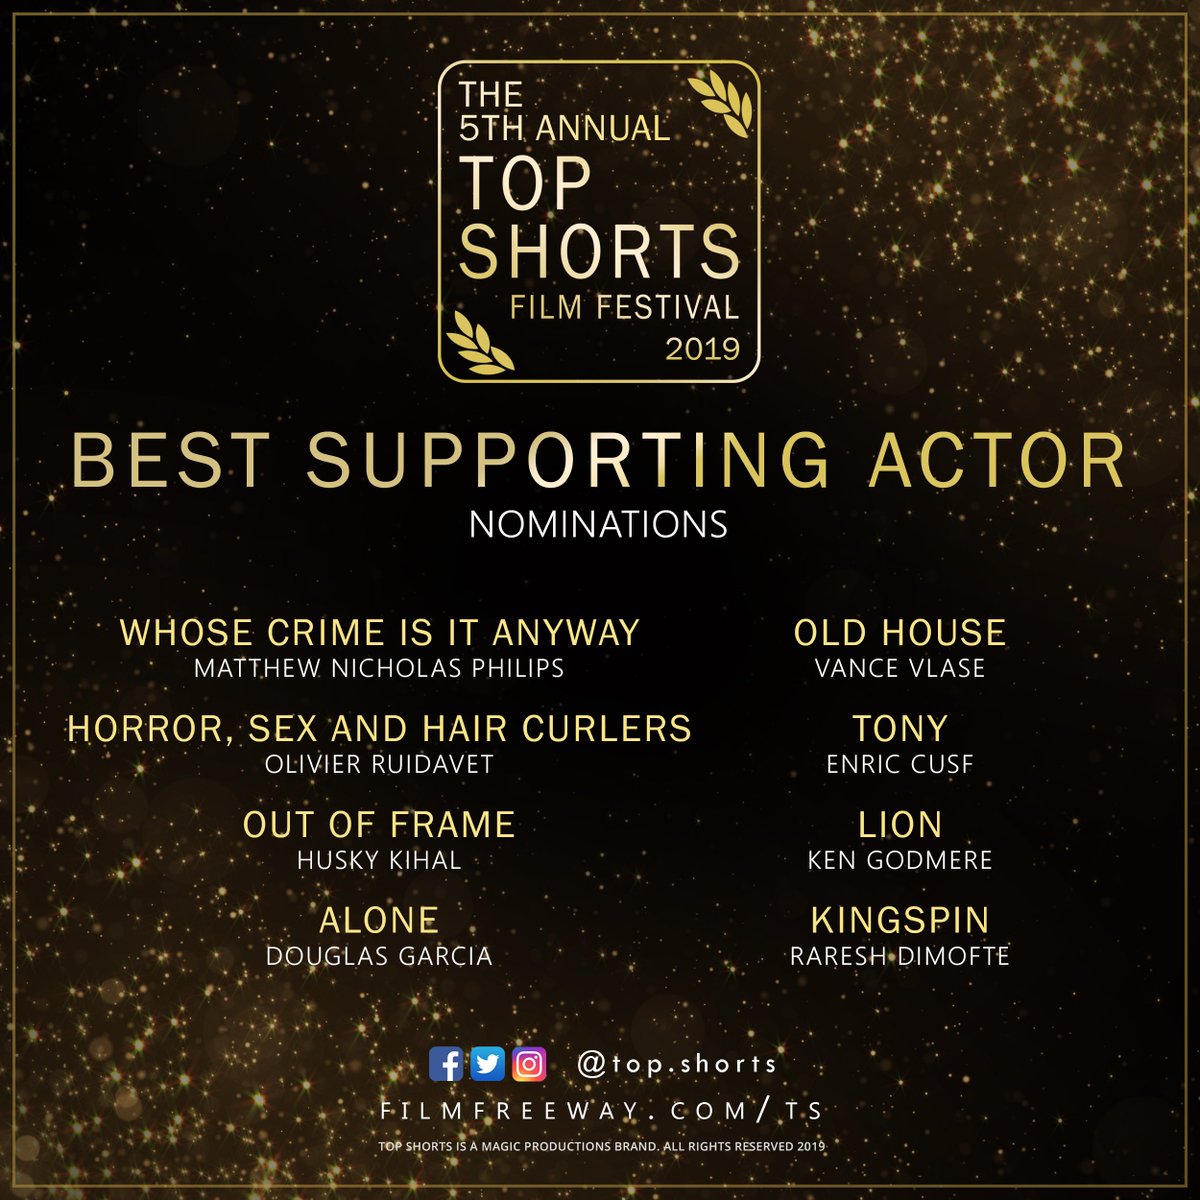 Best Supporting Actor of the Year topshorts.net #topshorts19 #nominations #top8 #indiefilm #shortfilm #actor #supportingactor